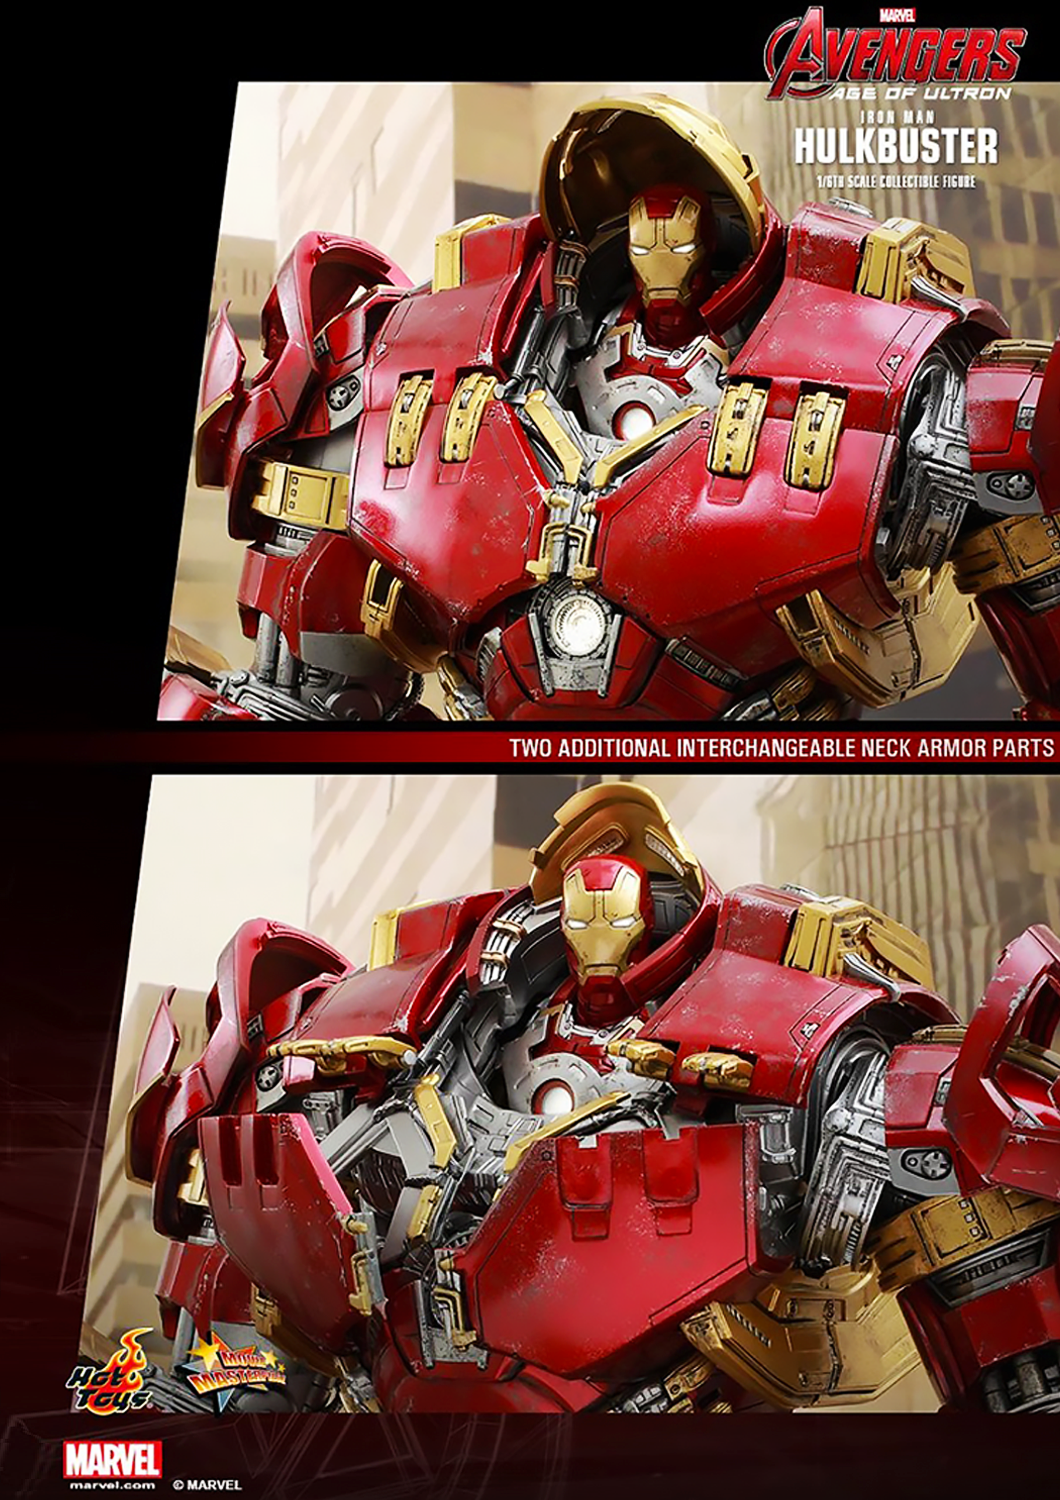 HOT TOYS MARVEL AVENGERS AGE OF ULTRON: IRONMAN MARK 44 HULKBUSTER 1/6 SCALE - MMS285 - Anotoys Collectibles